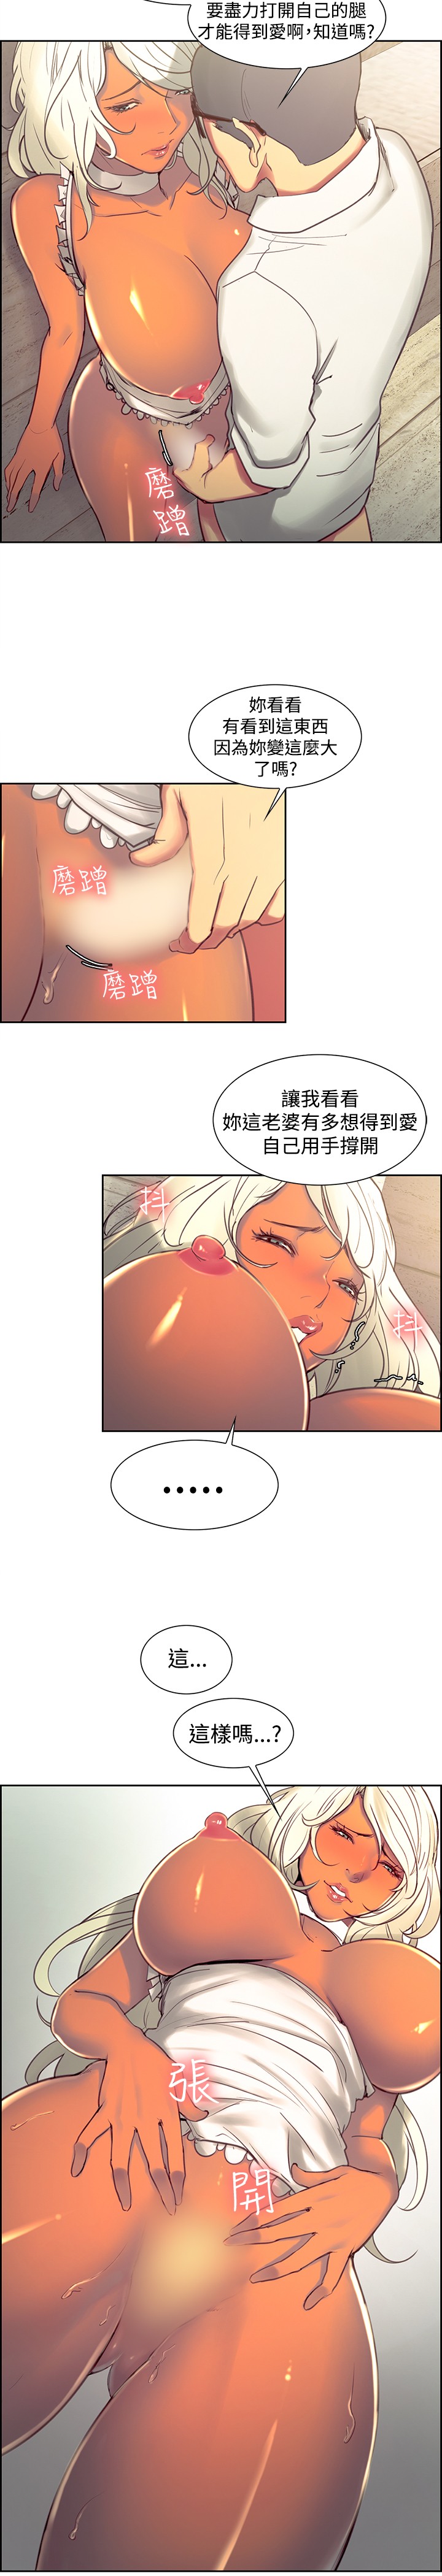 [Serious] Domesticate the Housekeeper 调教家政妇 Ch.29~41 [Chinese]中文 page 44 full